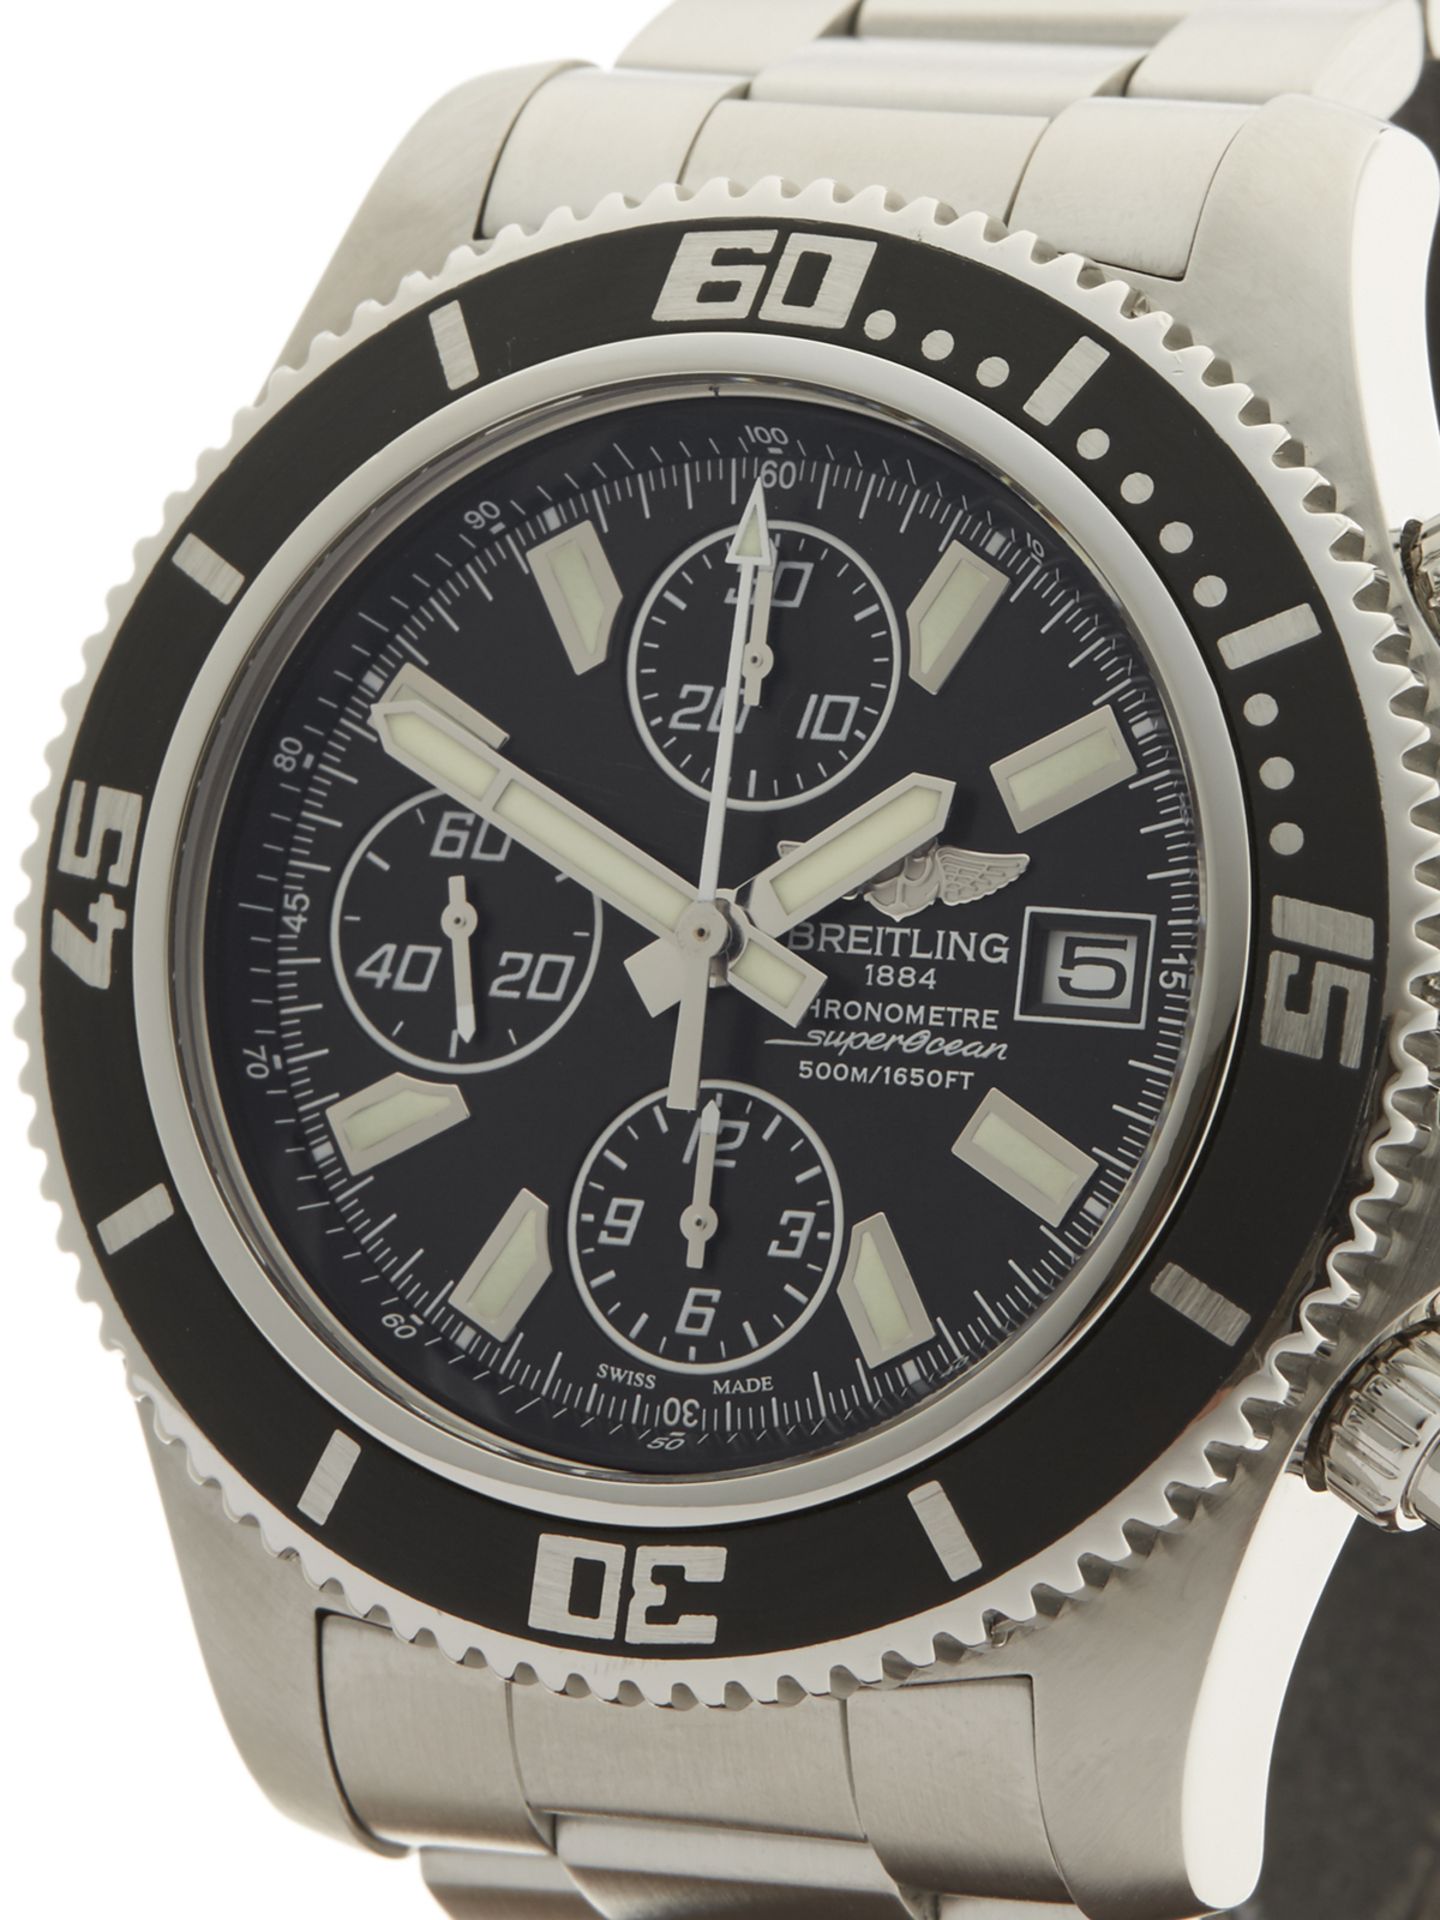 Breitling Superocean II Chronograph 43mm Stainless Steel A1334102 - Image 3 of 9